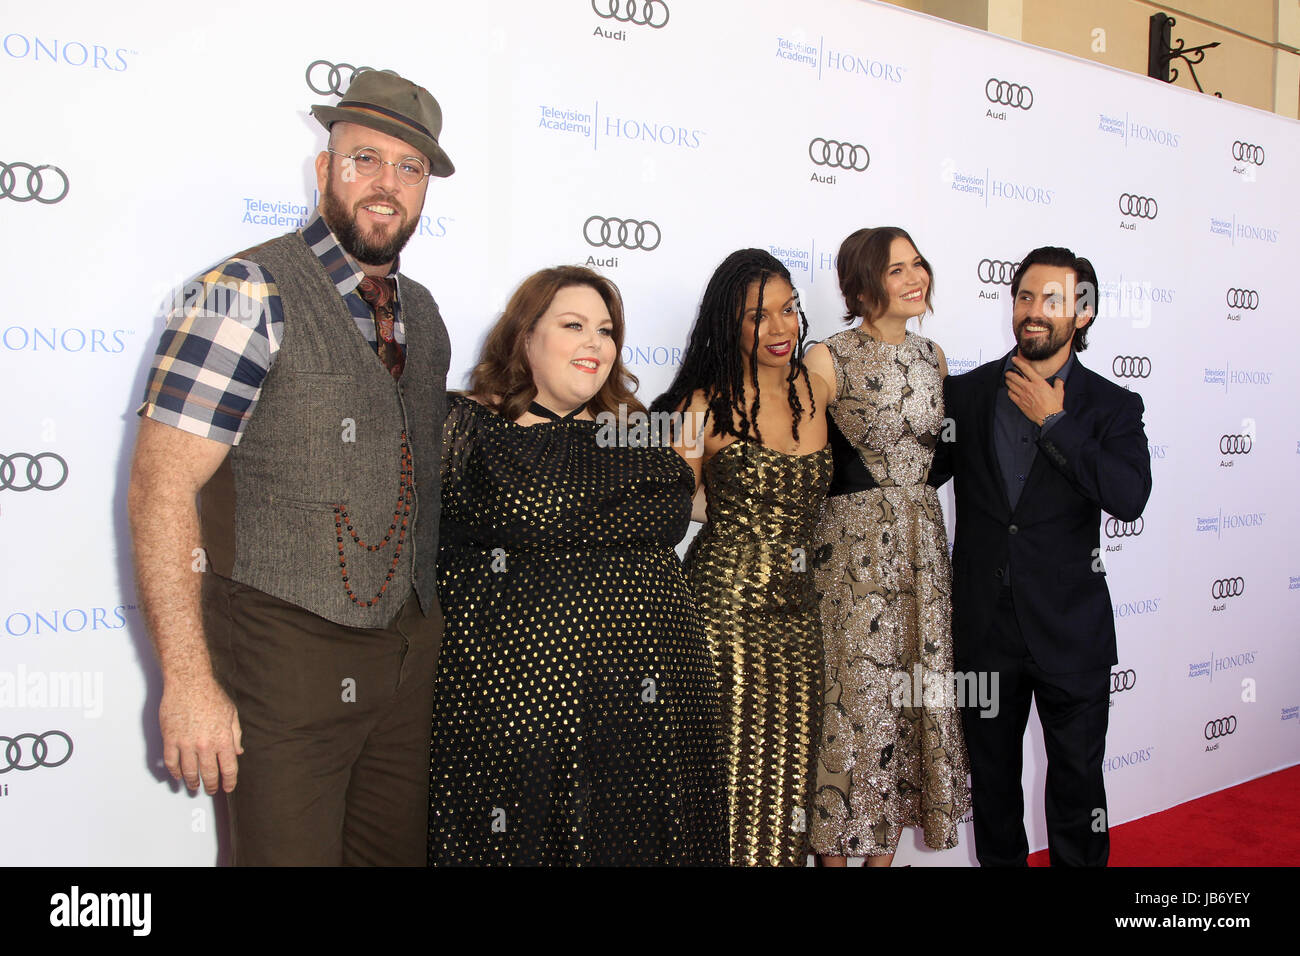 Beverly Hills, CA, USA. 8th June, 2017. LOS ANGELES - JUN 8: Chris Sullivan, Chrissy Metz, Susan Kelechi Watson, Mandy Moore, Milo Ventimiglia at the 10th Annual Television Academy Honors at the Montage Hotel on June 8, 2017 in Beverly Hills, CA Credit: Kay Blake/ZUMA Wire/Alamy Live News Stock Photo